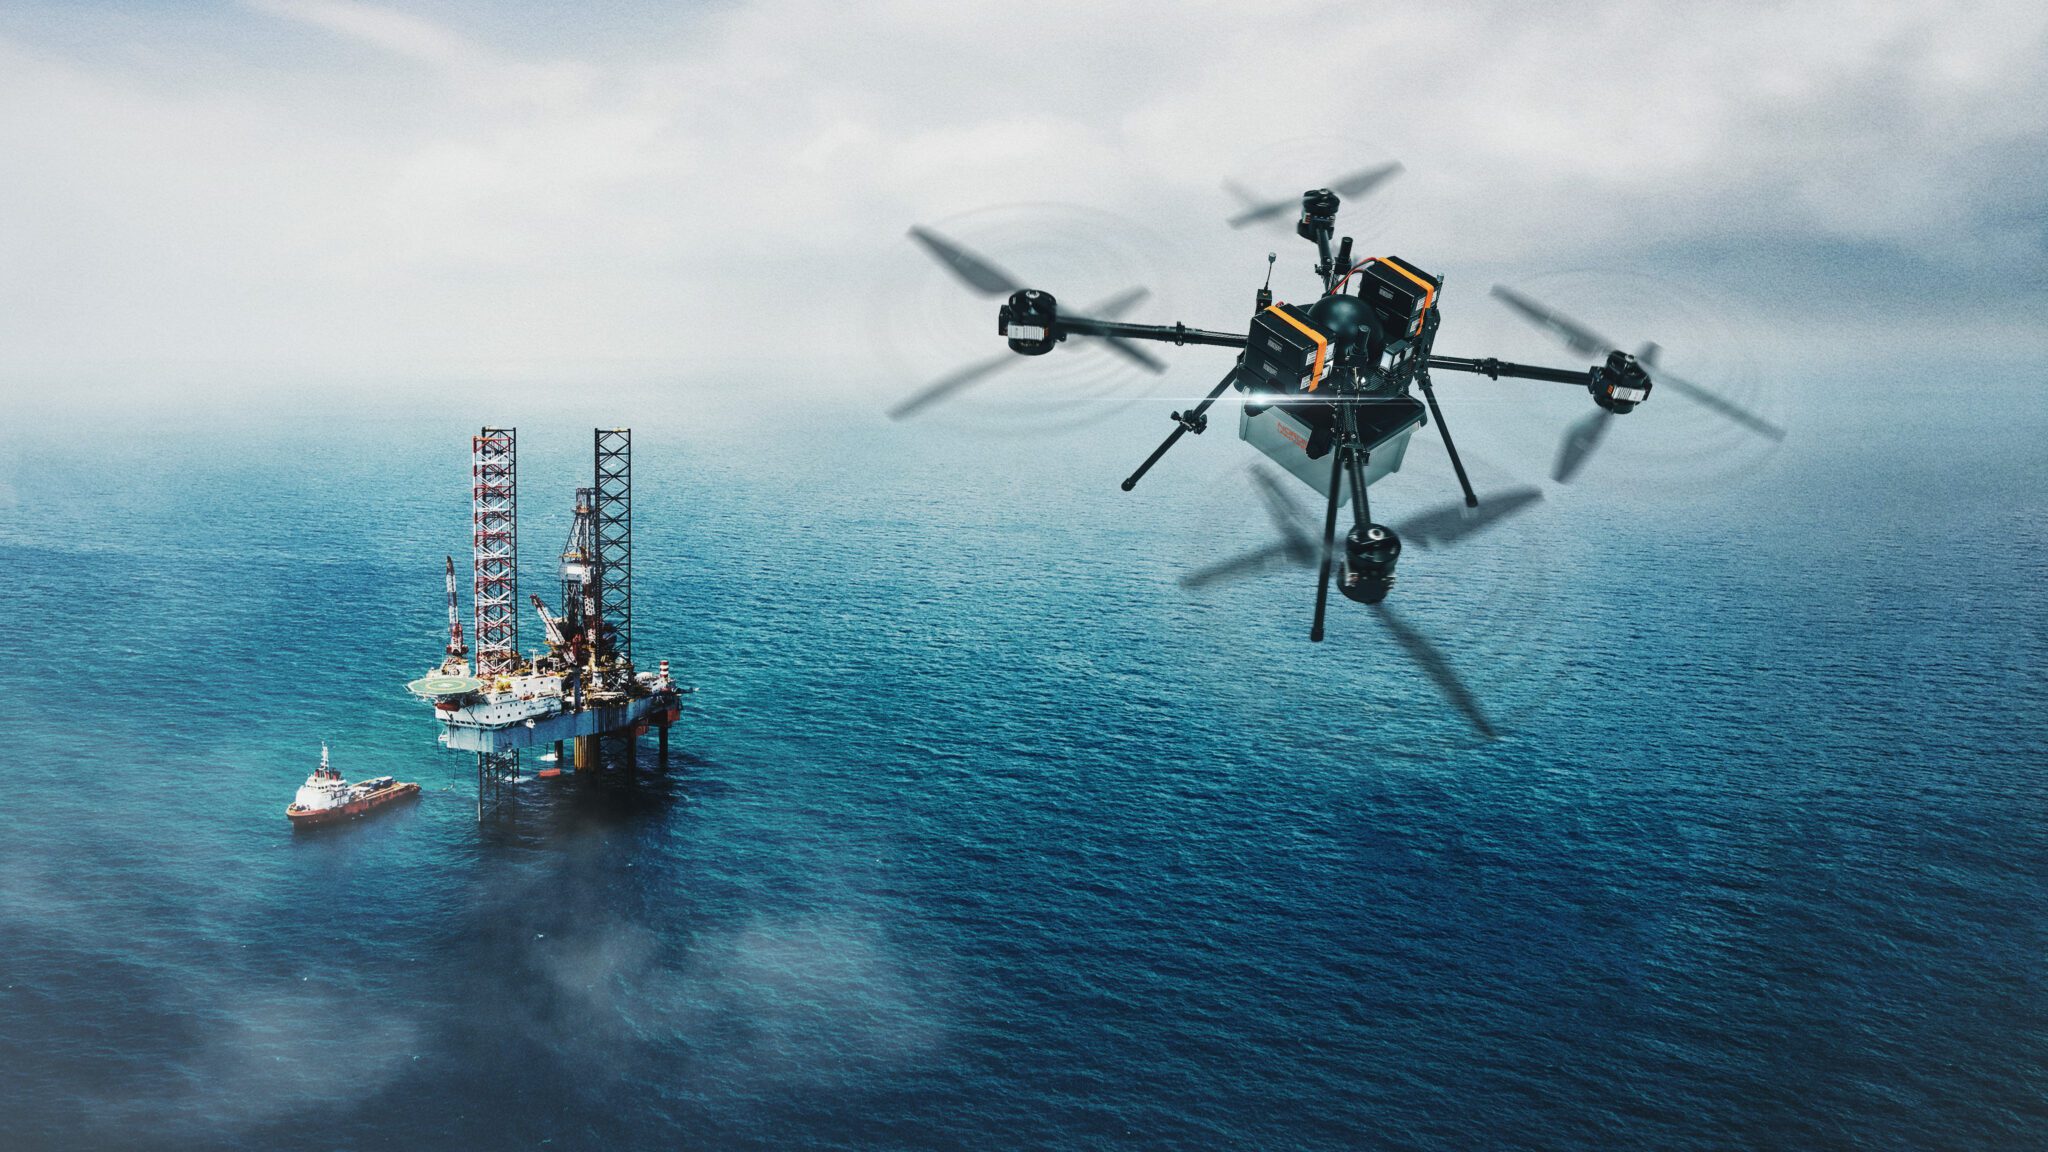 Equinor Looks to Drones to Make North Sea Rig Inspections Easier